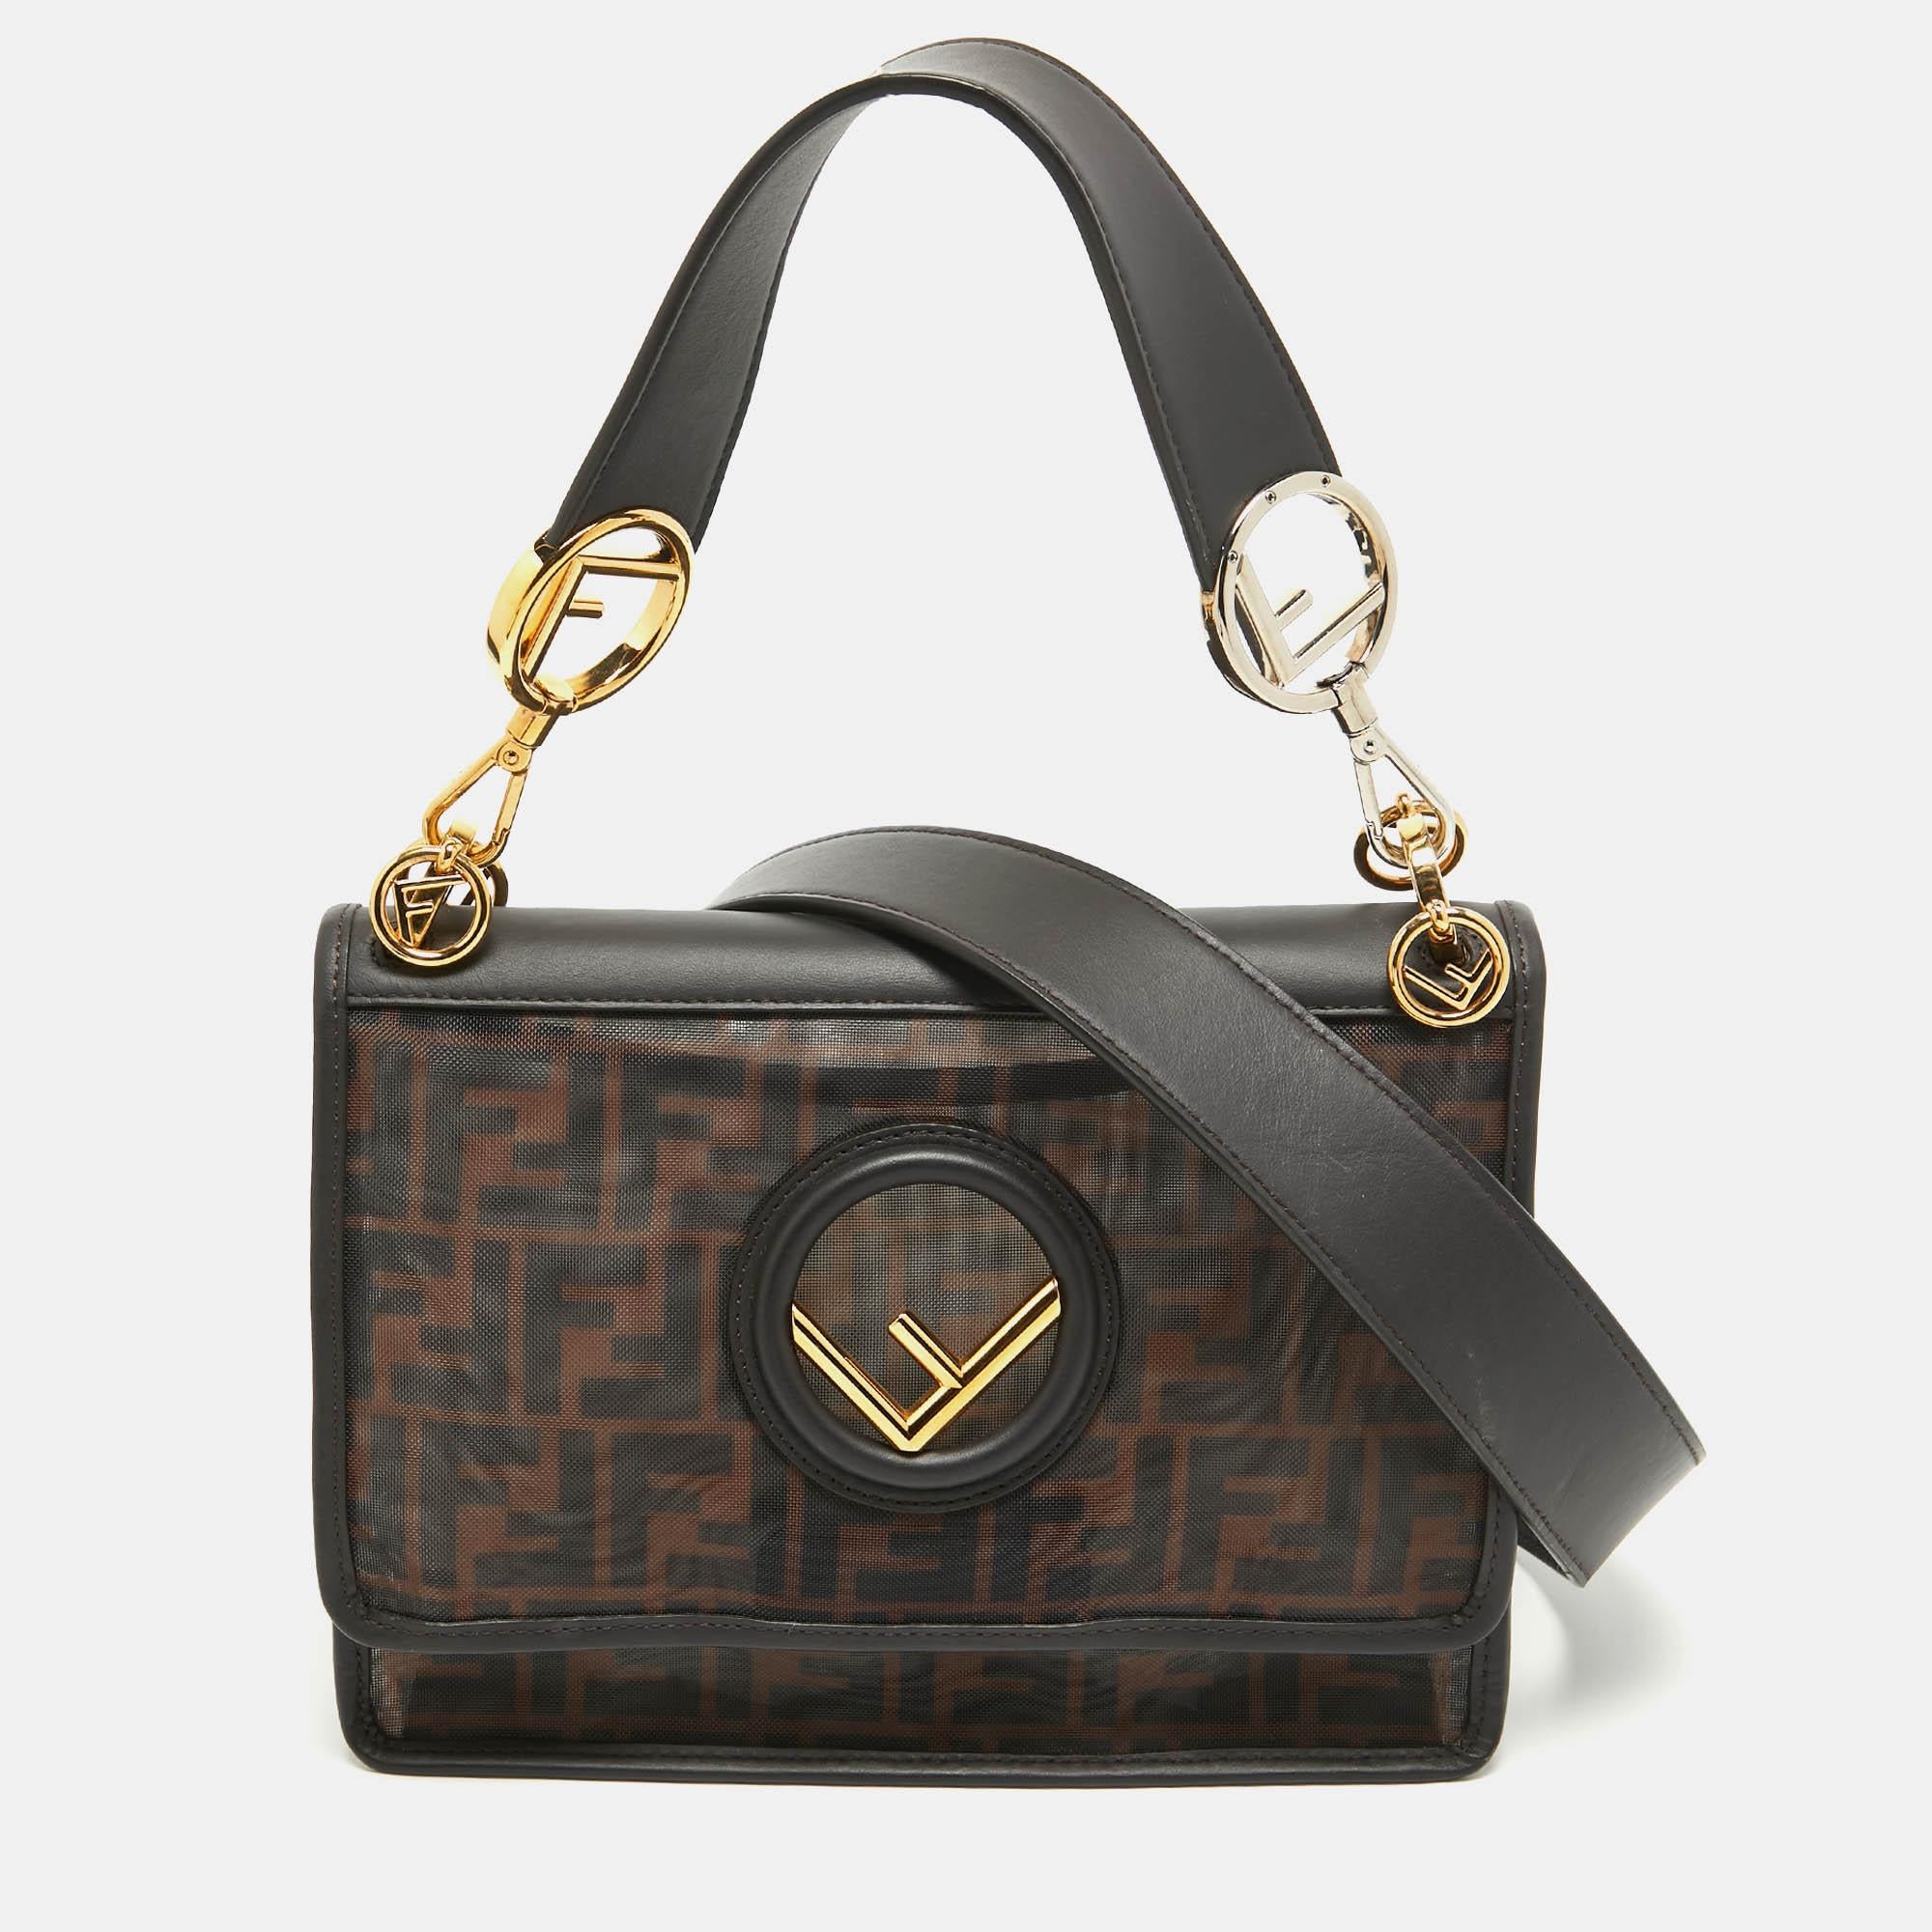 This Kan I shoulder bag from Fendi deserves a place in your luxury handbag collection. Accented with the slanted Fendi logo in two-toned hardware on the exterior creates a subtle contrast. With a flap-type closure and a spacious interior, this bag